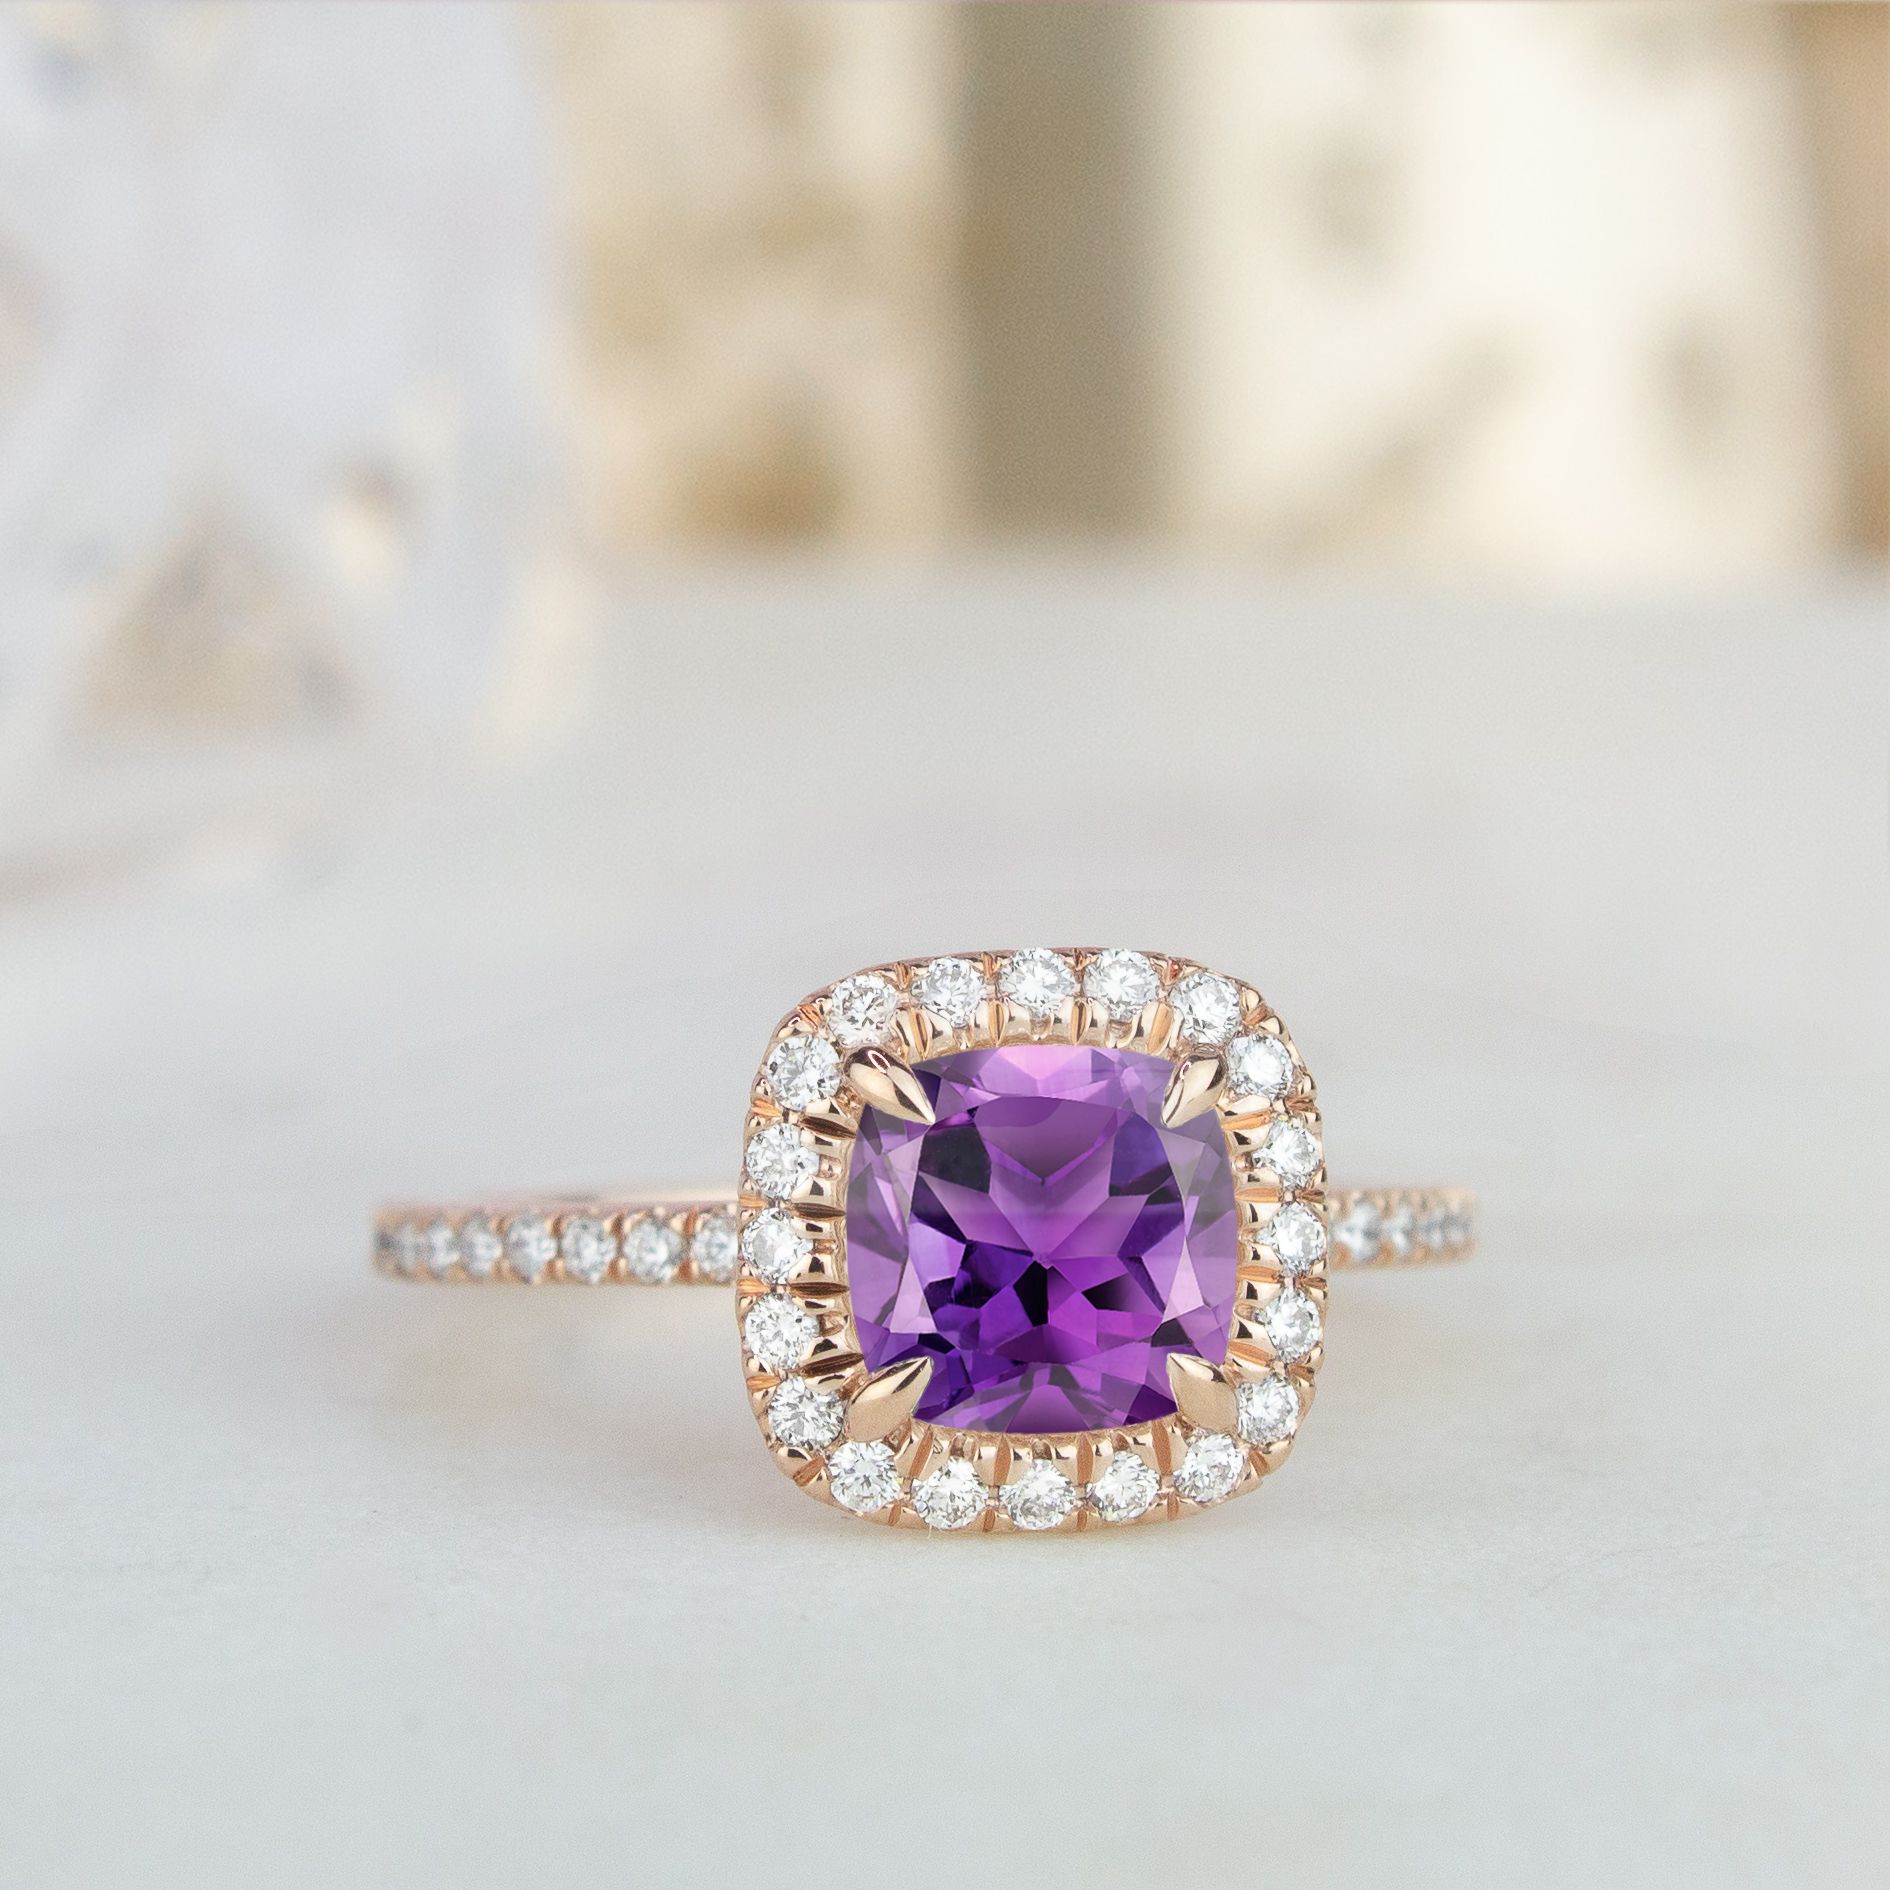 Gem in the Spotlight: Amethyst : Sobriety, Piety, and Beauty in a Gemstone  : Arden Jewelers